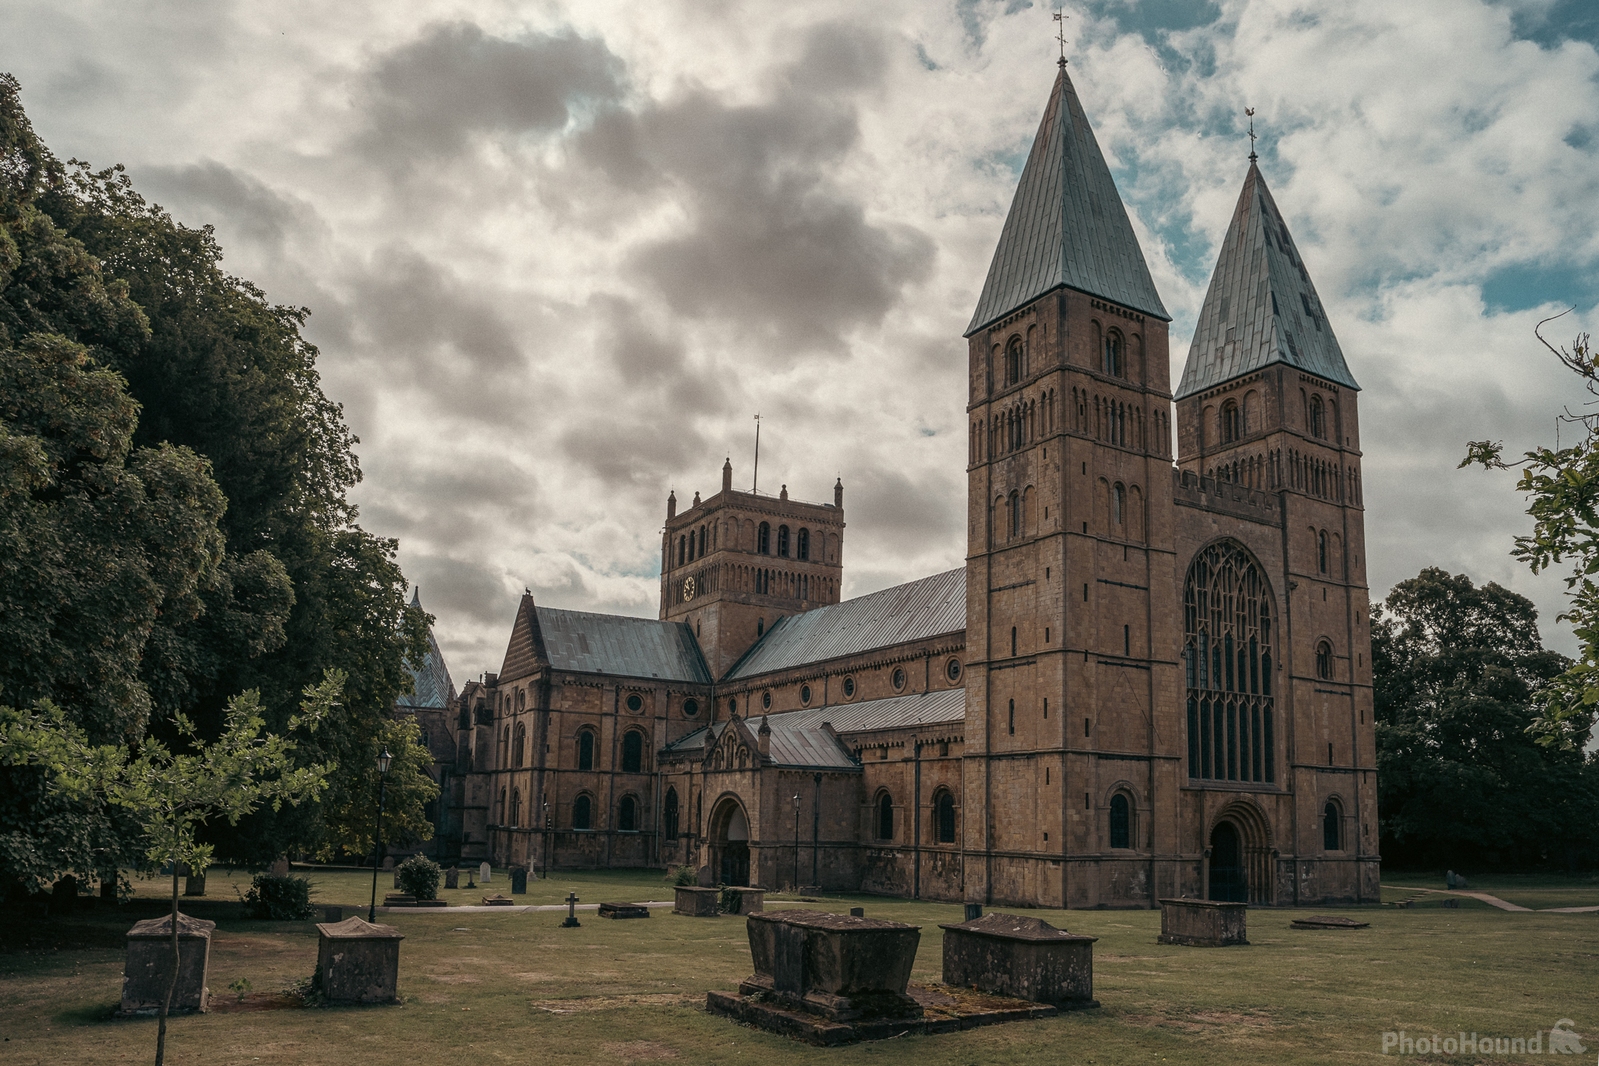 Image of Southwell Minster by James Billings.